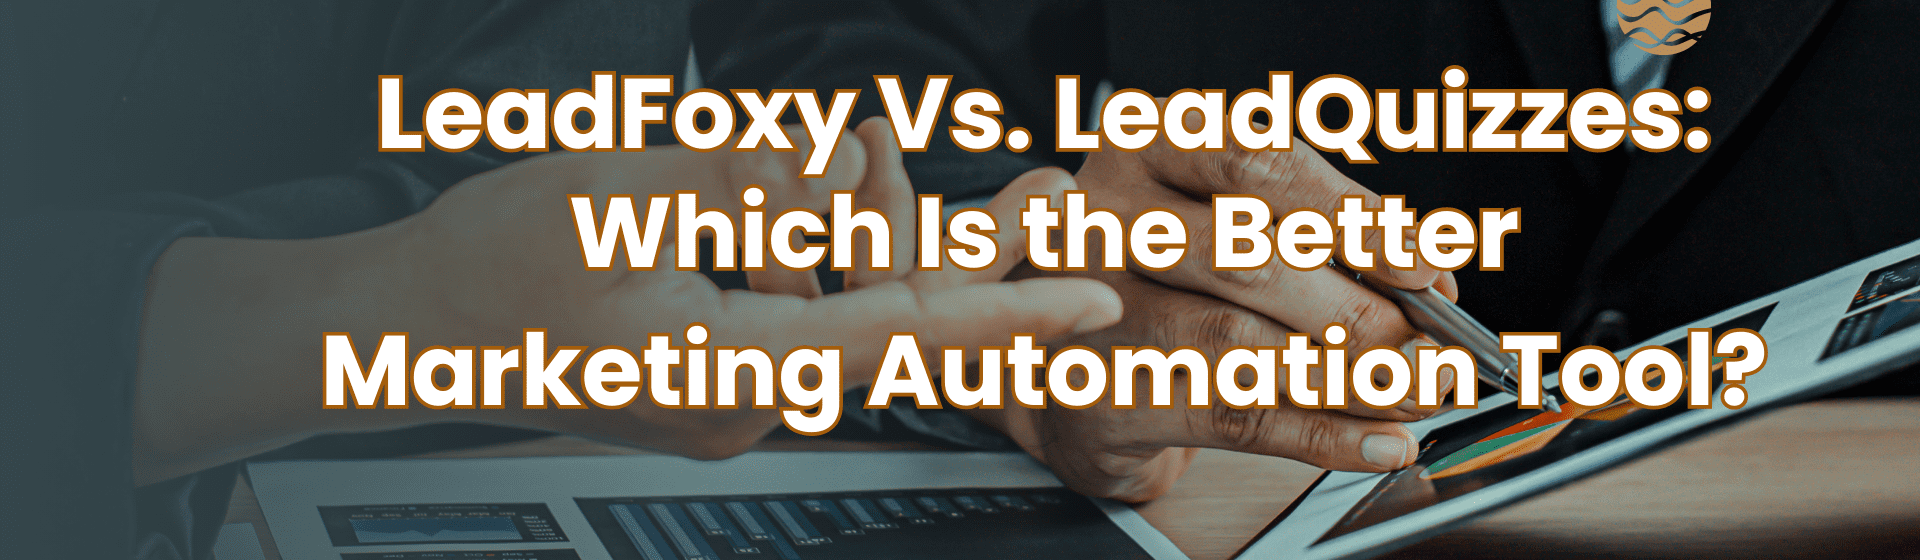 LeadFoxy Vs. LeadQuizzes: Which Is the Better Marketing Automation Tool?